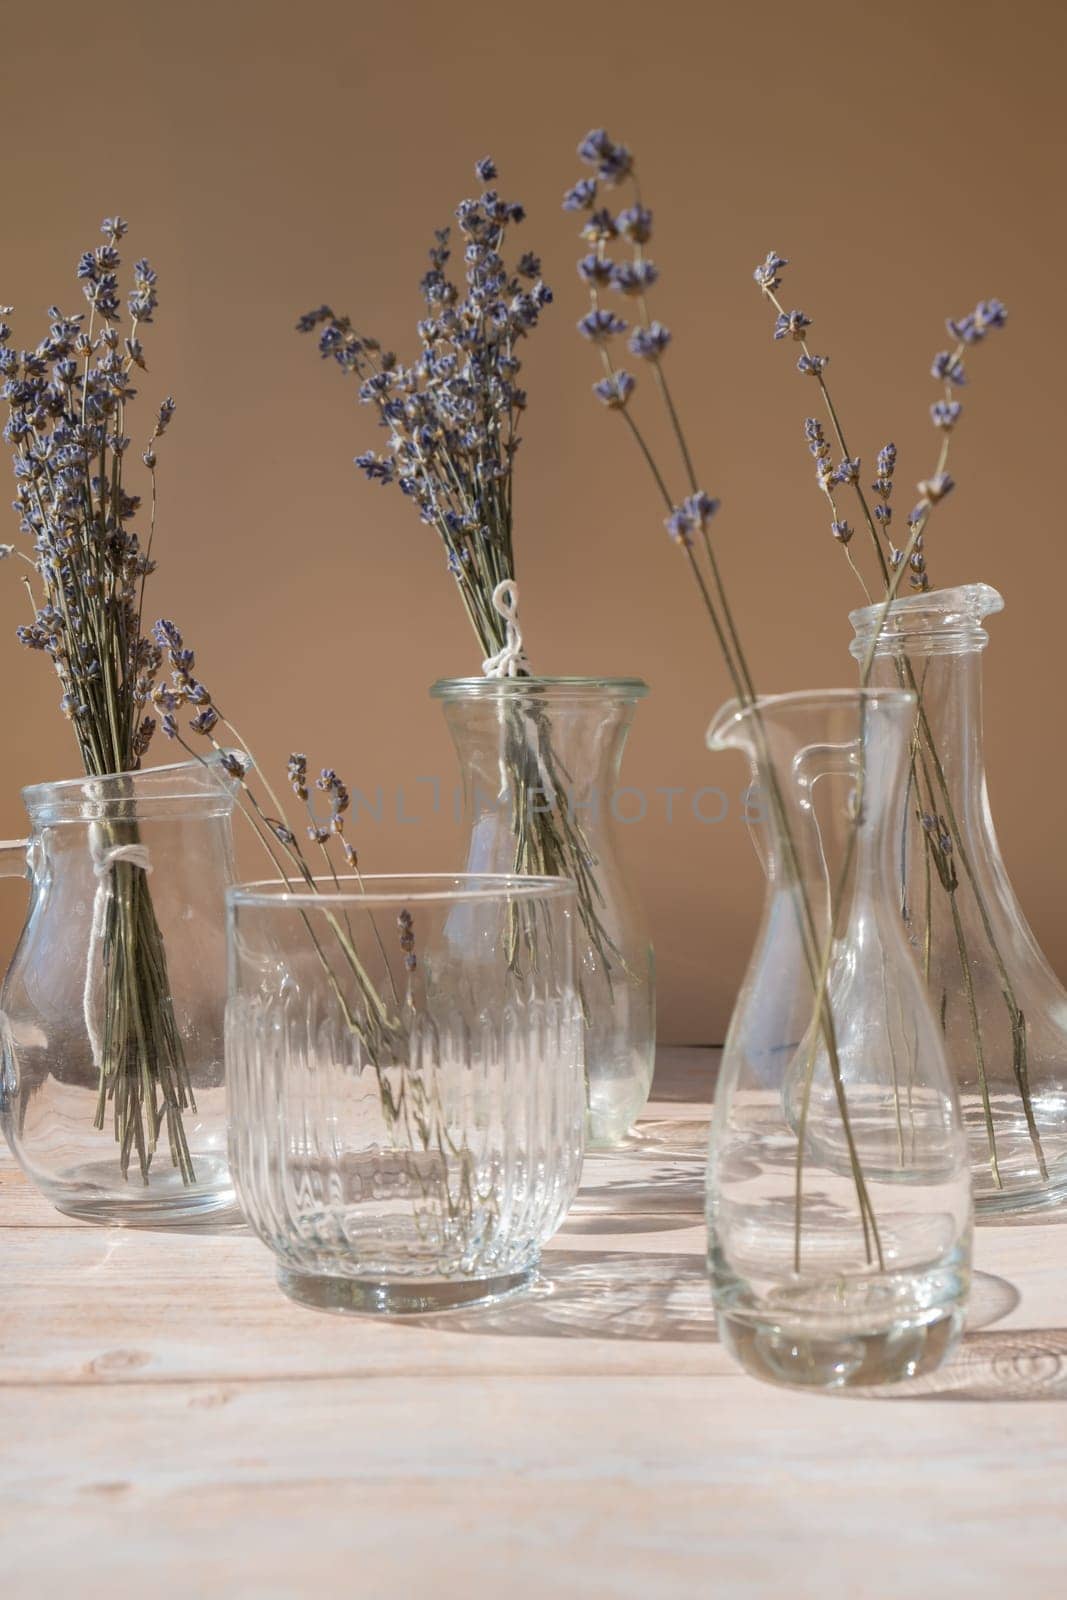 Lavender flowers in glass dishes. Dried herbal flowers on beige background. Minimal still life eco concept. Ideal space for displaying cosmetics with lavender extract. Copy space